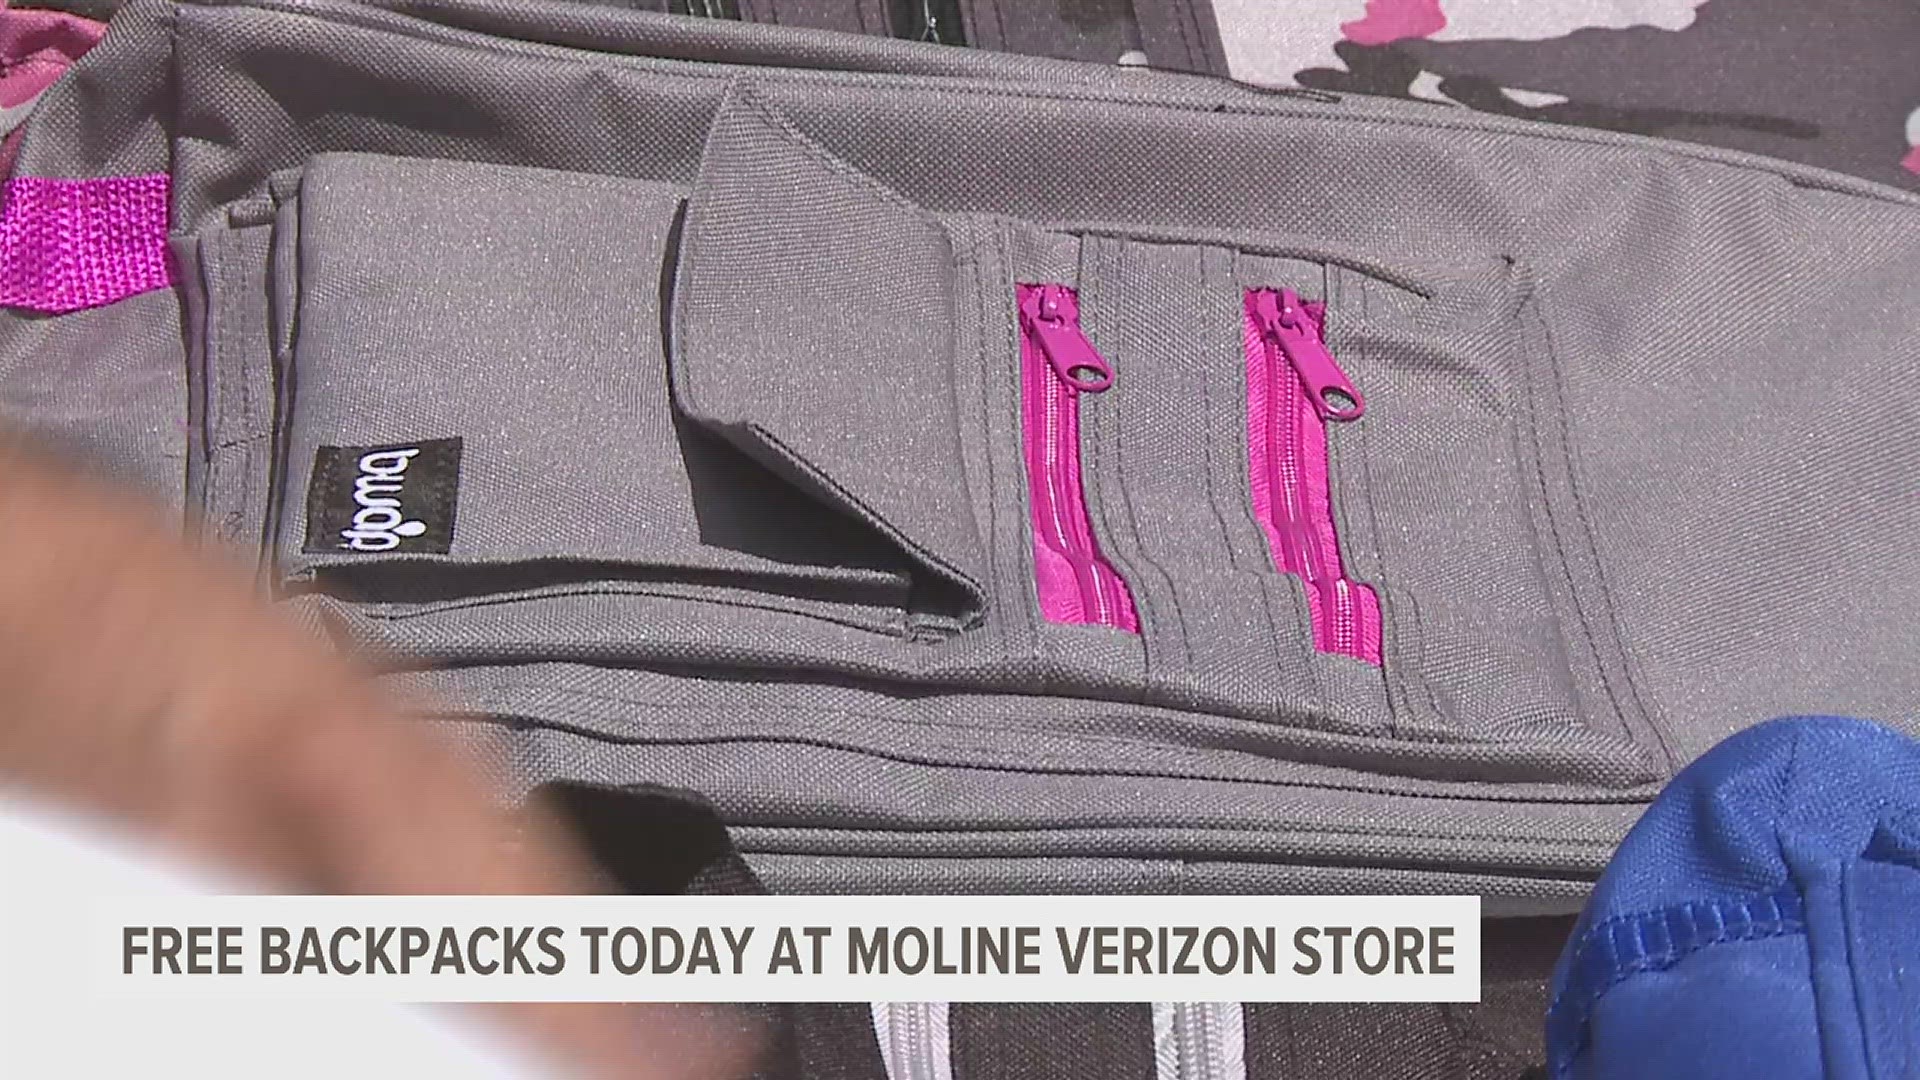 Verizon retailer TCC is donating 120,000 backpacks to students in need across the country, including at its Quad Cities locations.